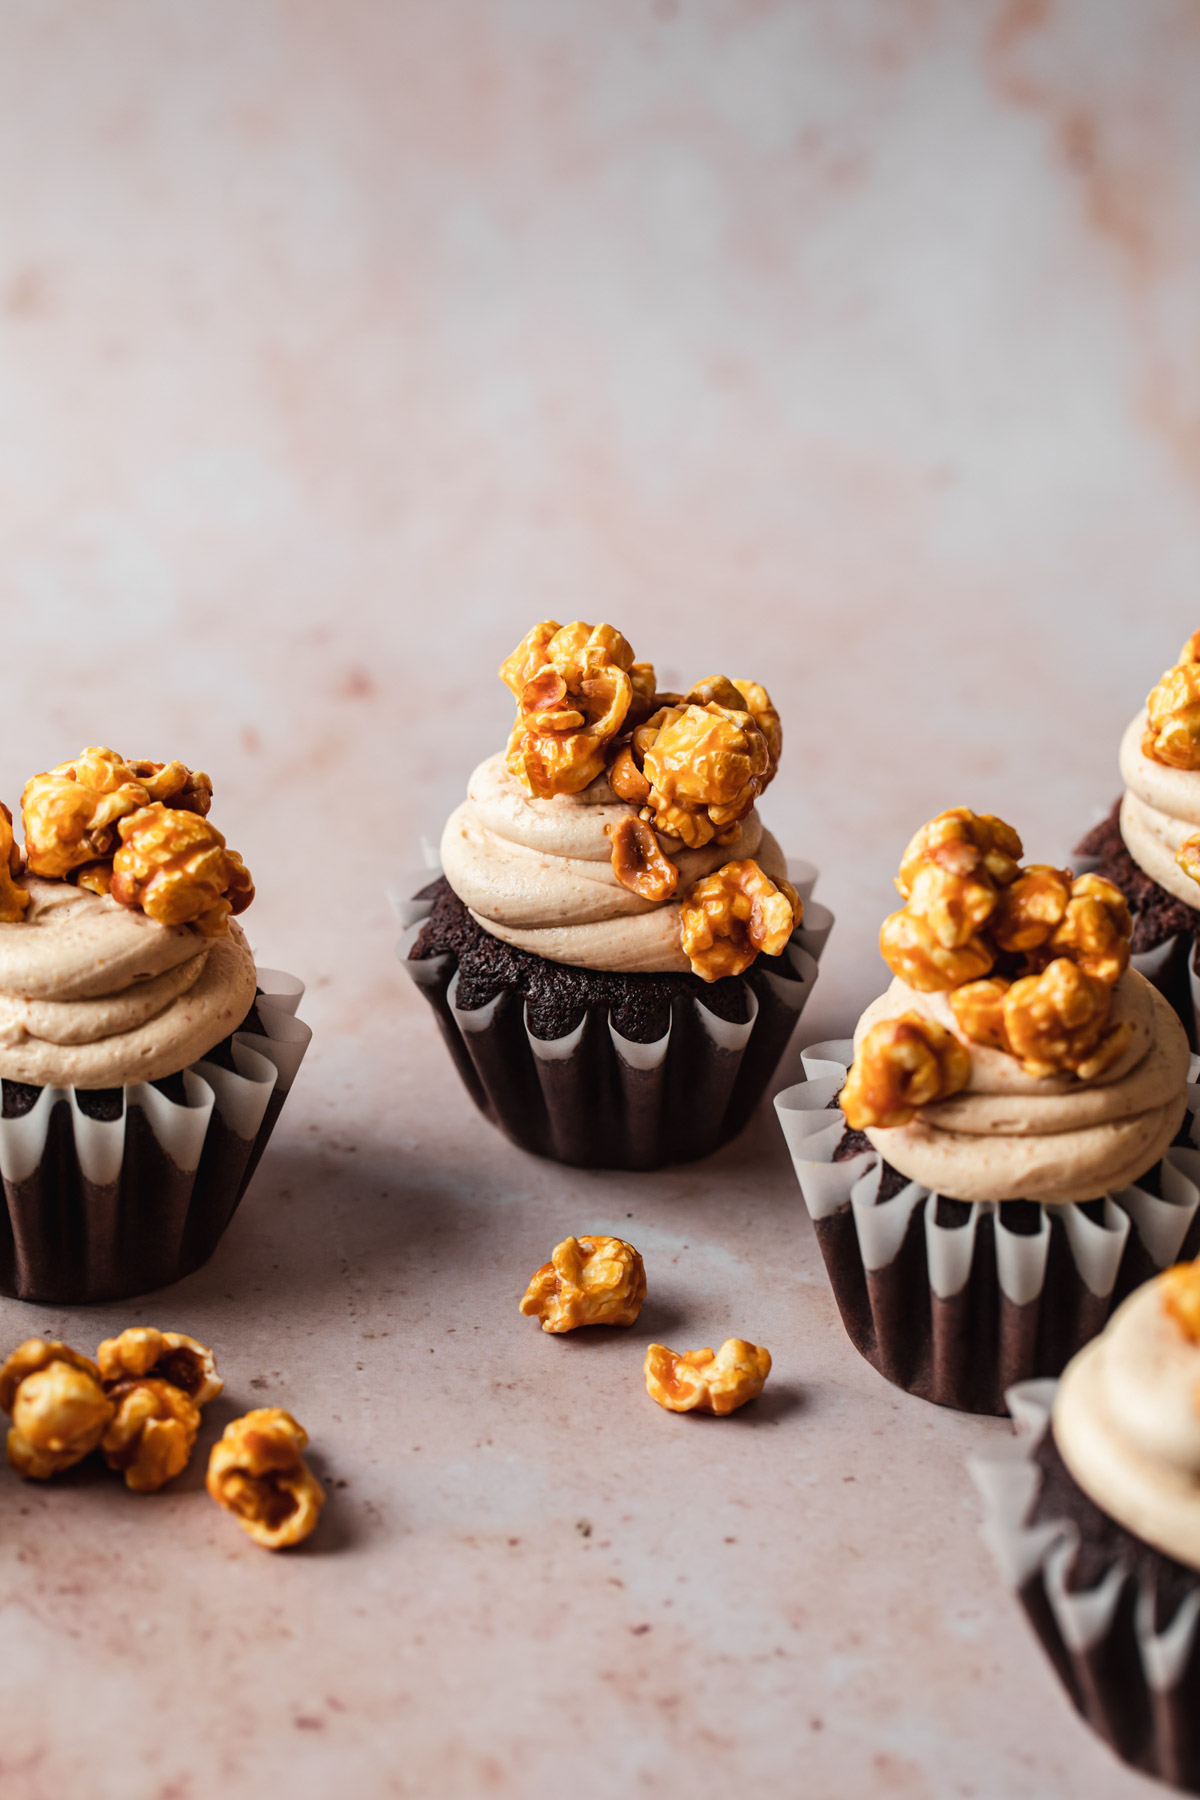 Chocolate peanut butter cupcakes with caramel corn on top